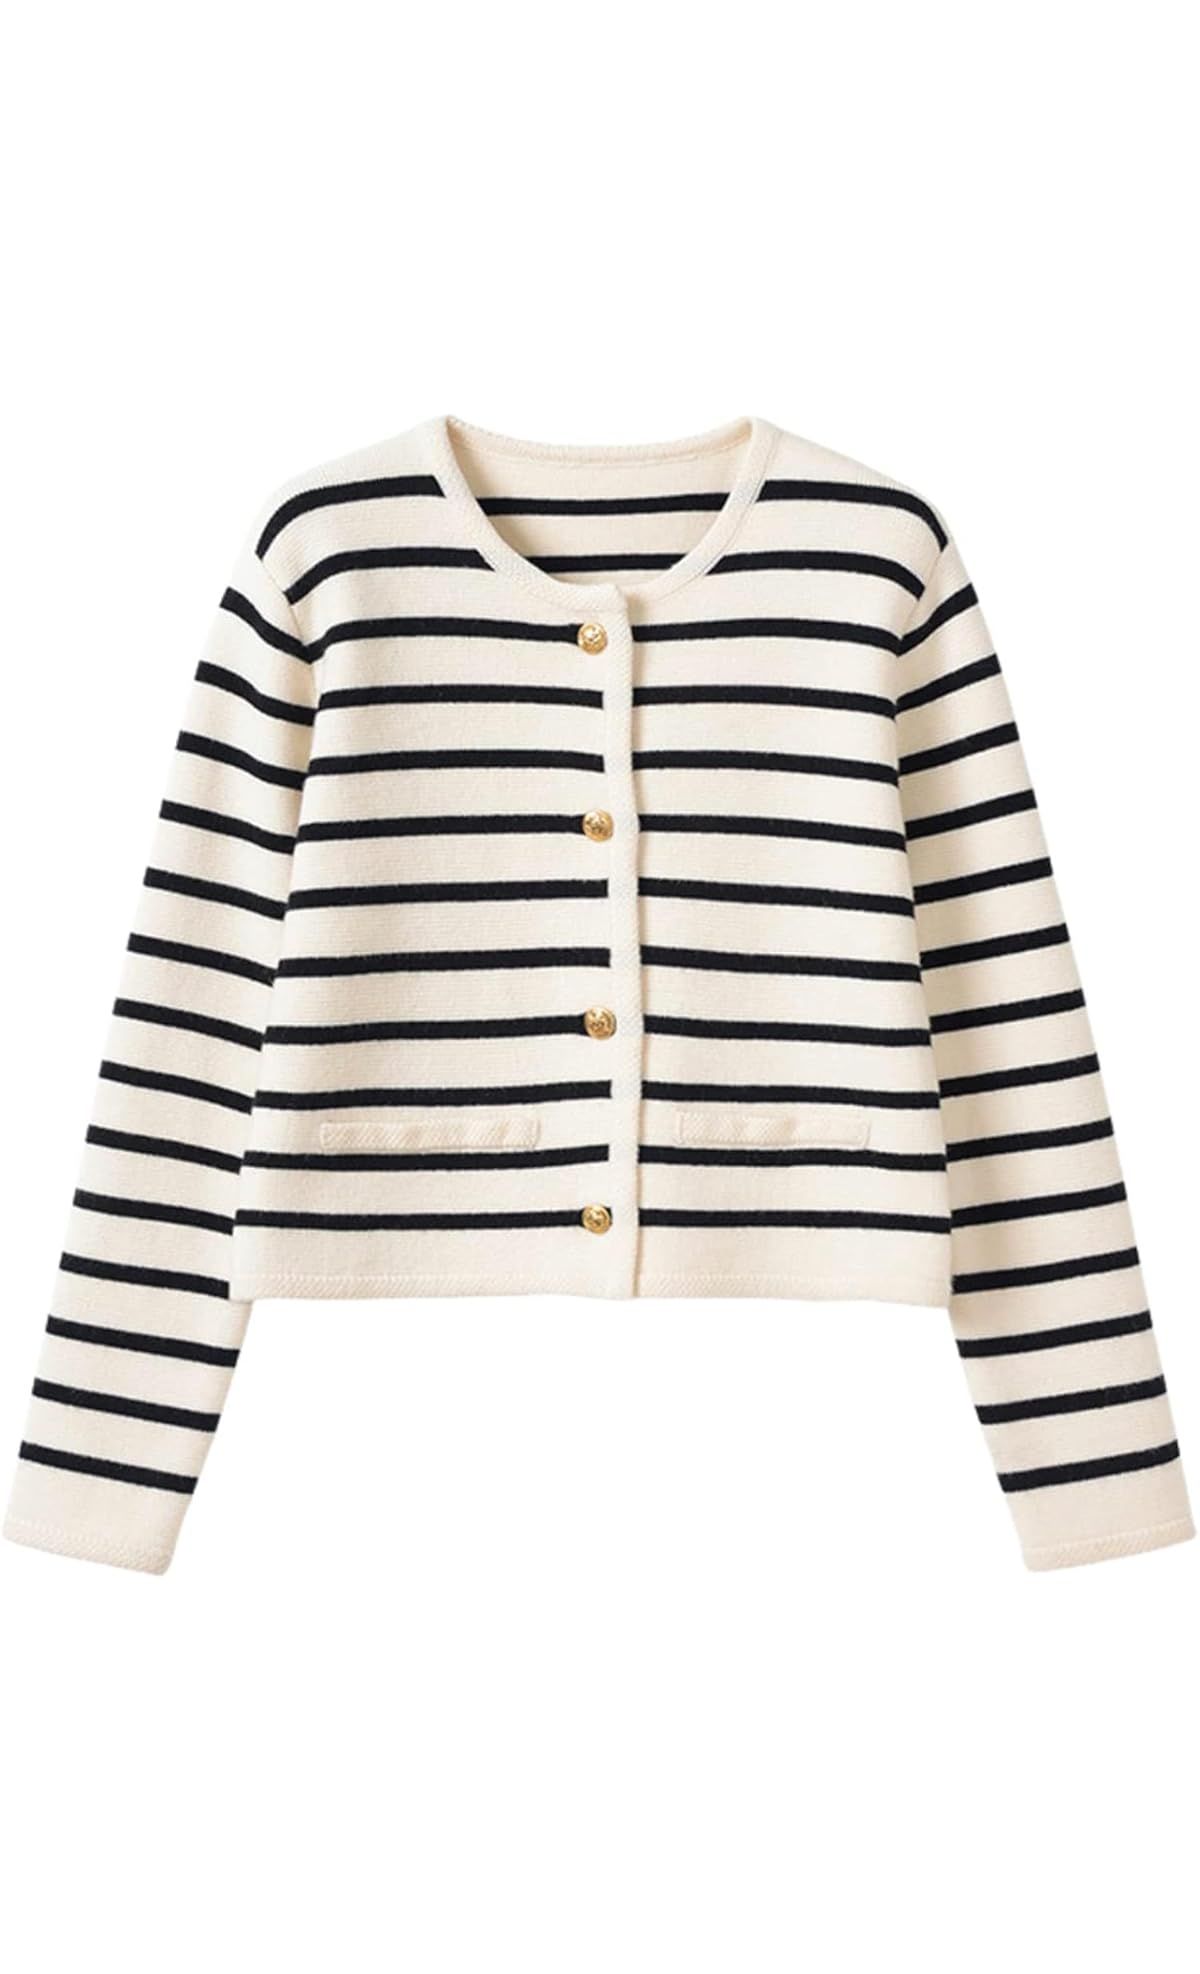 2023 Women's Long Sleeve Striped Sweater Button Cardigan Knitted Open Coat Outwear with Pockets | Amazon (US)